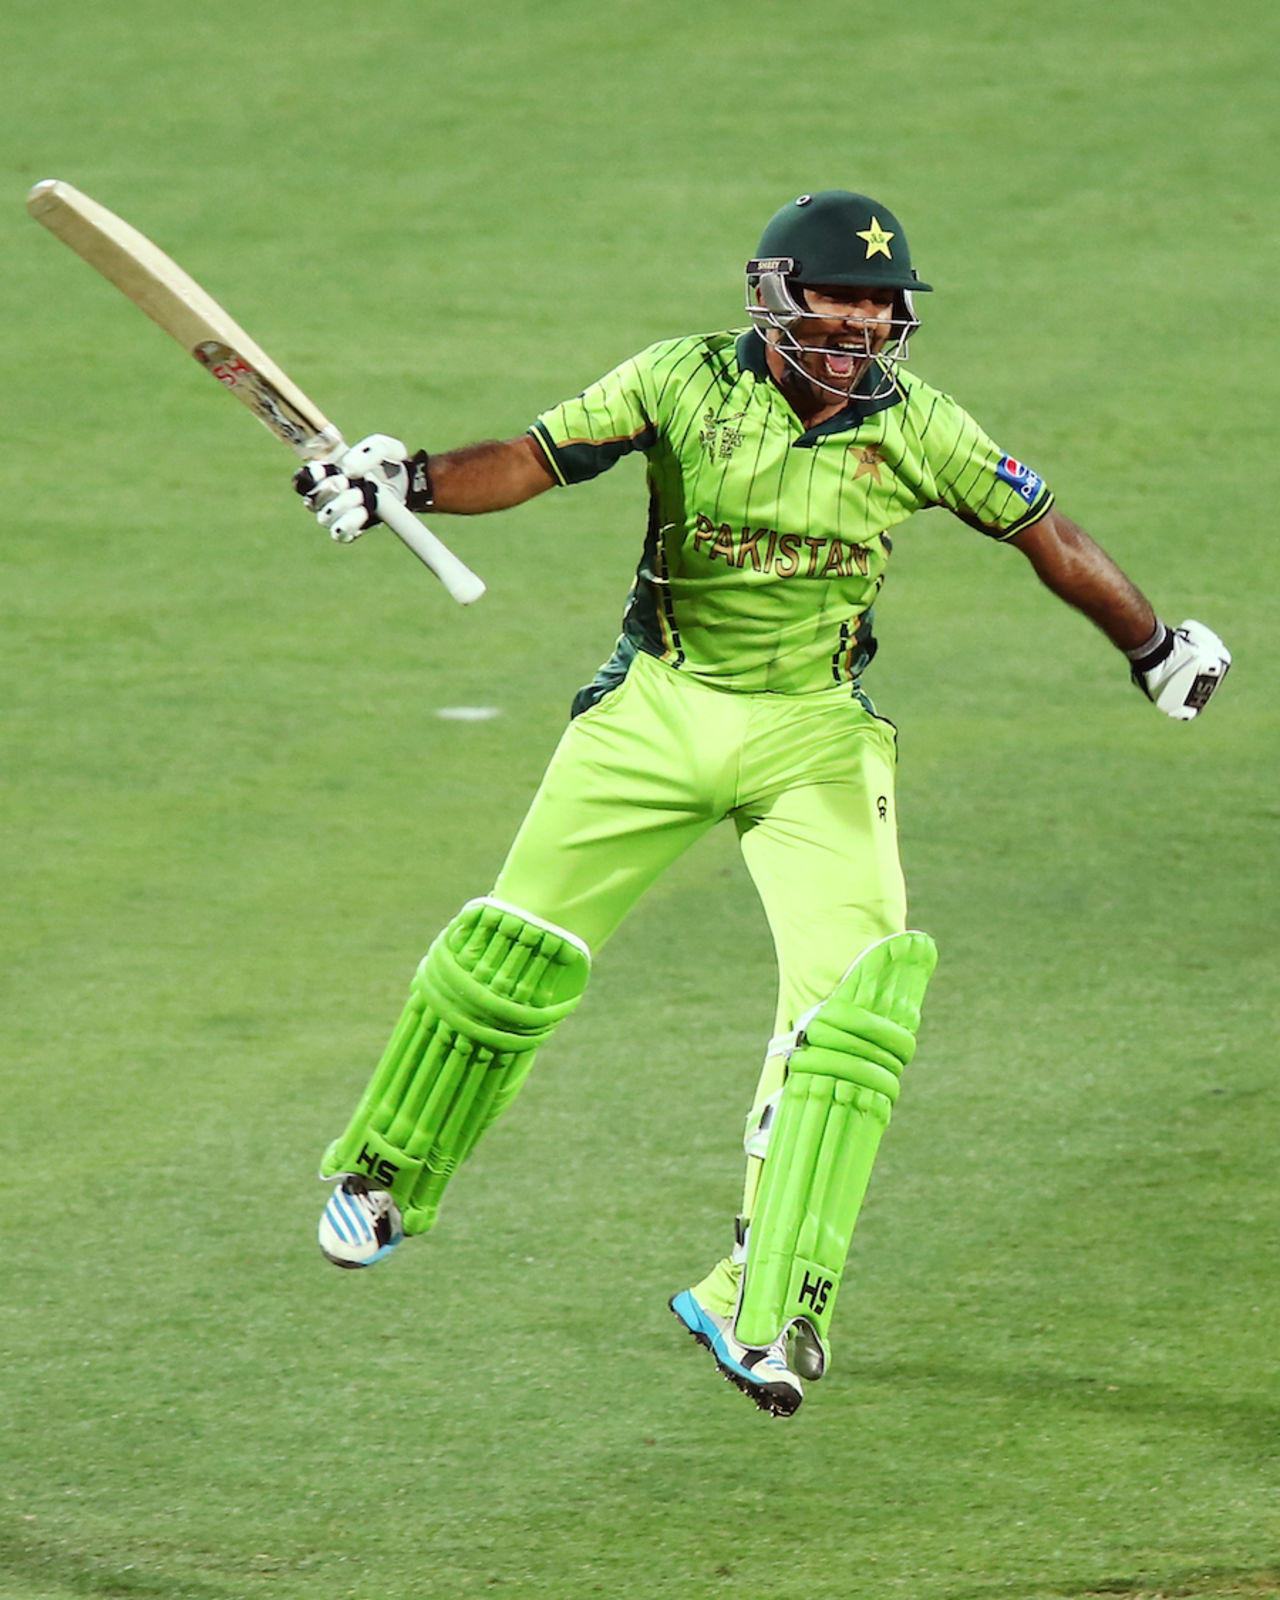 Sarfraz Ahmed is thrilled after completing his hundred, Ireland v Pakistan, World Cup 2015, Group B, Adelaide, March 15, 2015